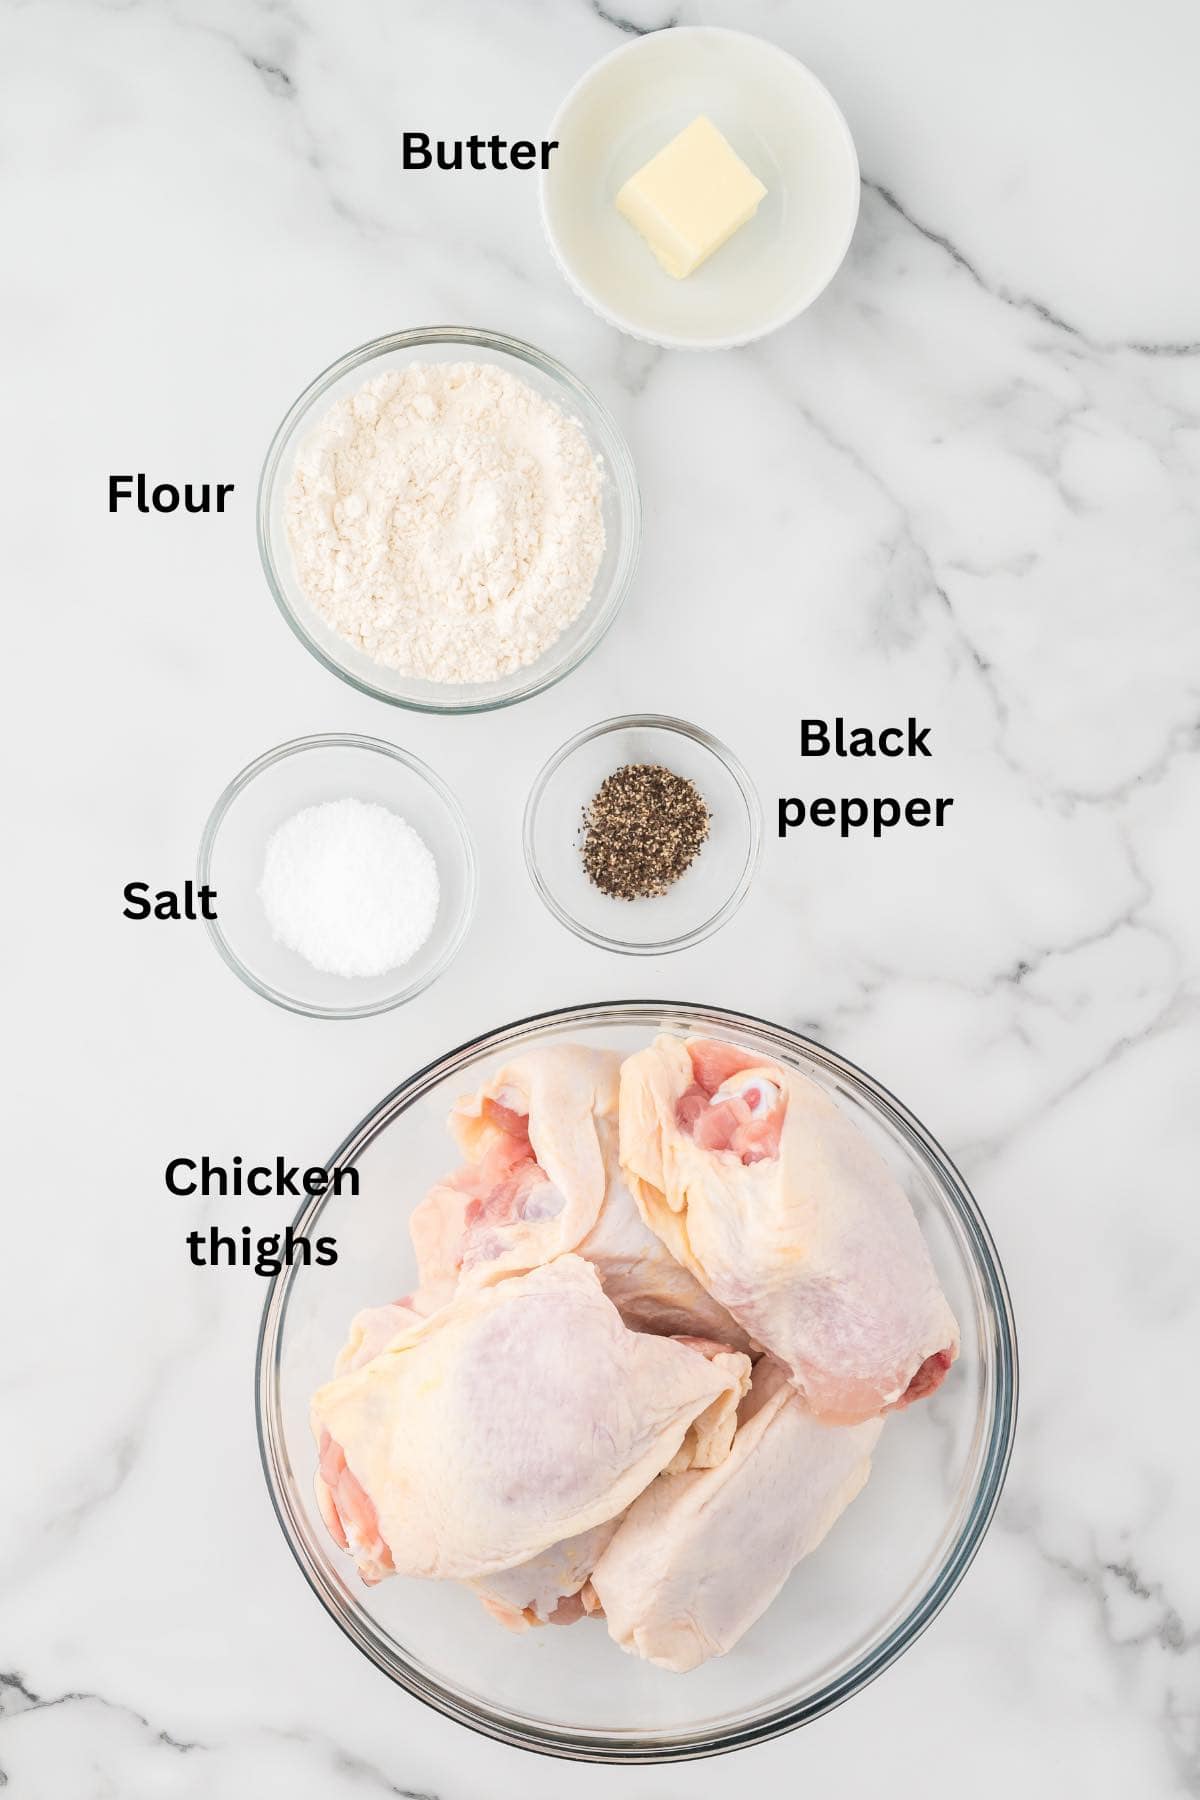 Ingredients to make fried chicken in the oven include chicken thighs, flour, and butter. 